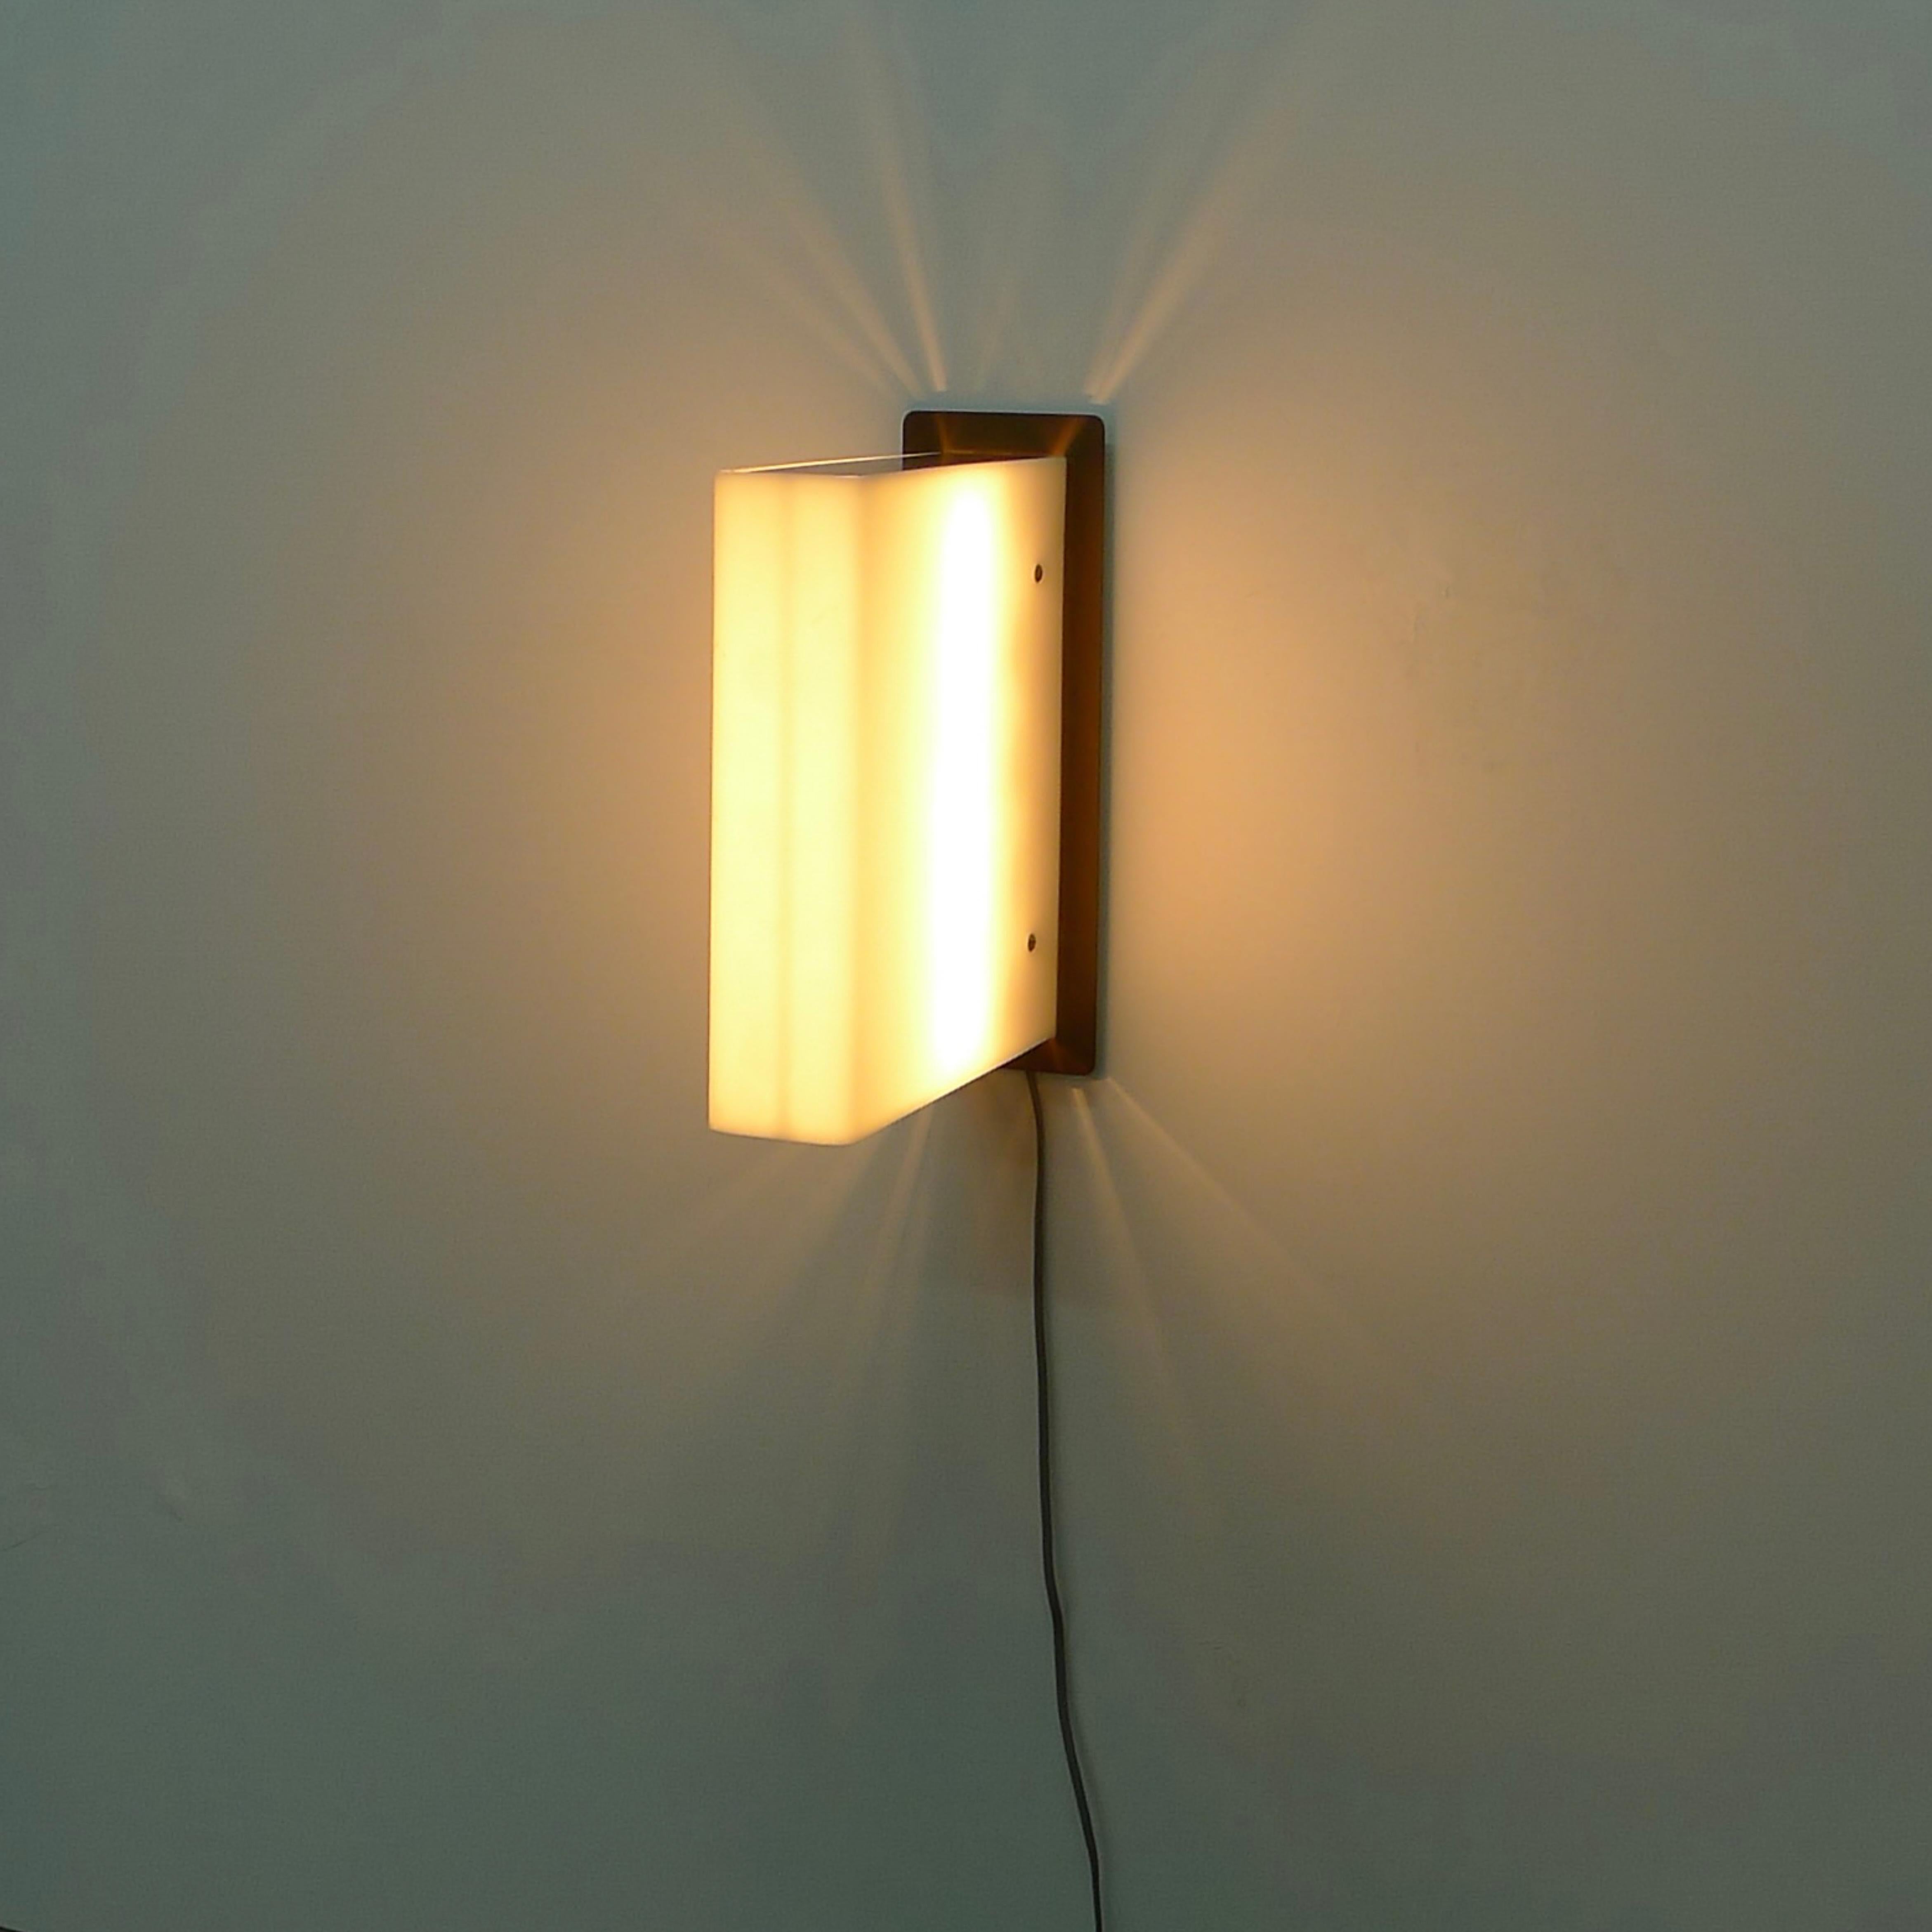 This very rare wall light was designed by Gio Ponti circa 1957, produced by Arredoluce, Monza and hung in the Villa Goldschmidt, Buenos Aires, Argentina.  An identical example is to be found in the Villa Planchart in Caracas, Venezuela.

The white